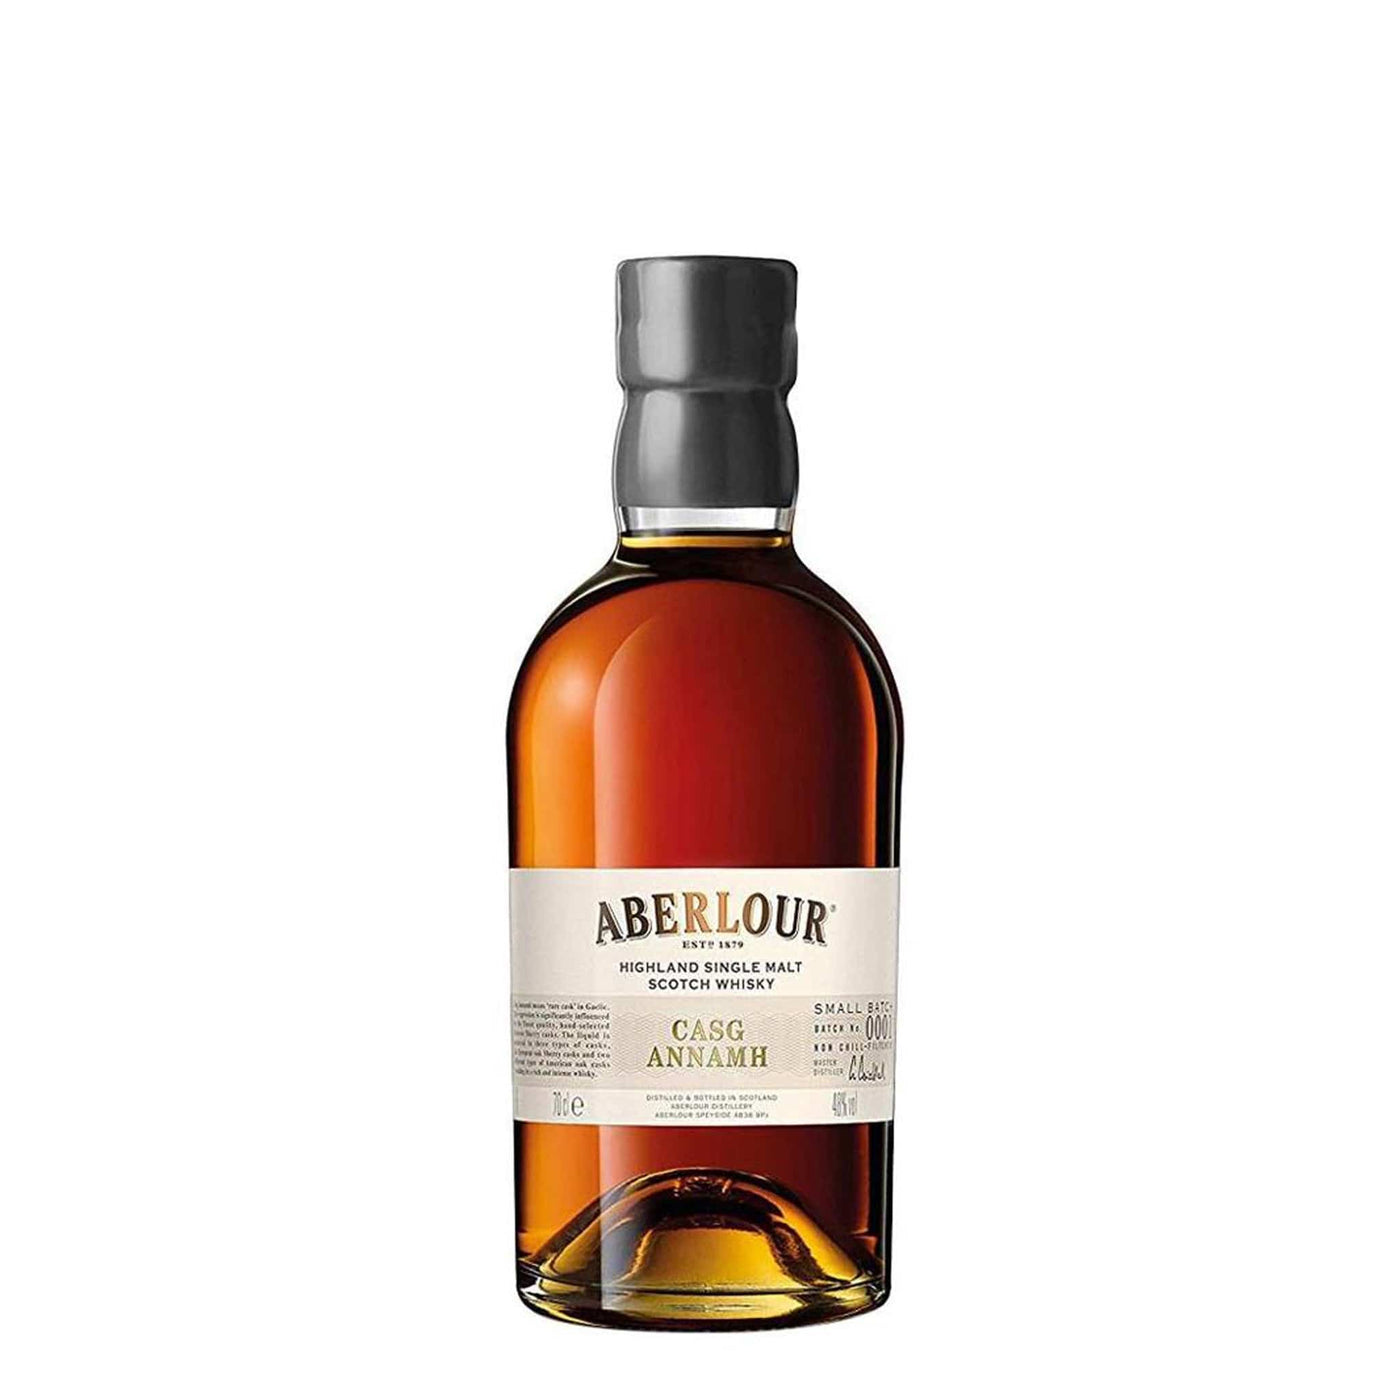 Buy Aberlour Casg Annamh Speyside Single Malt Scotch Whisky 48% 1L gift  pack online at a great price